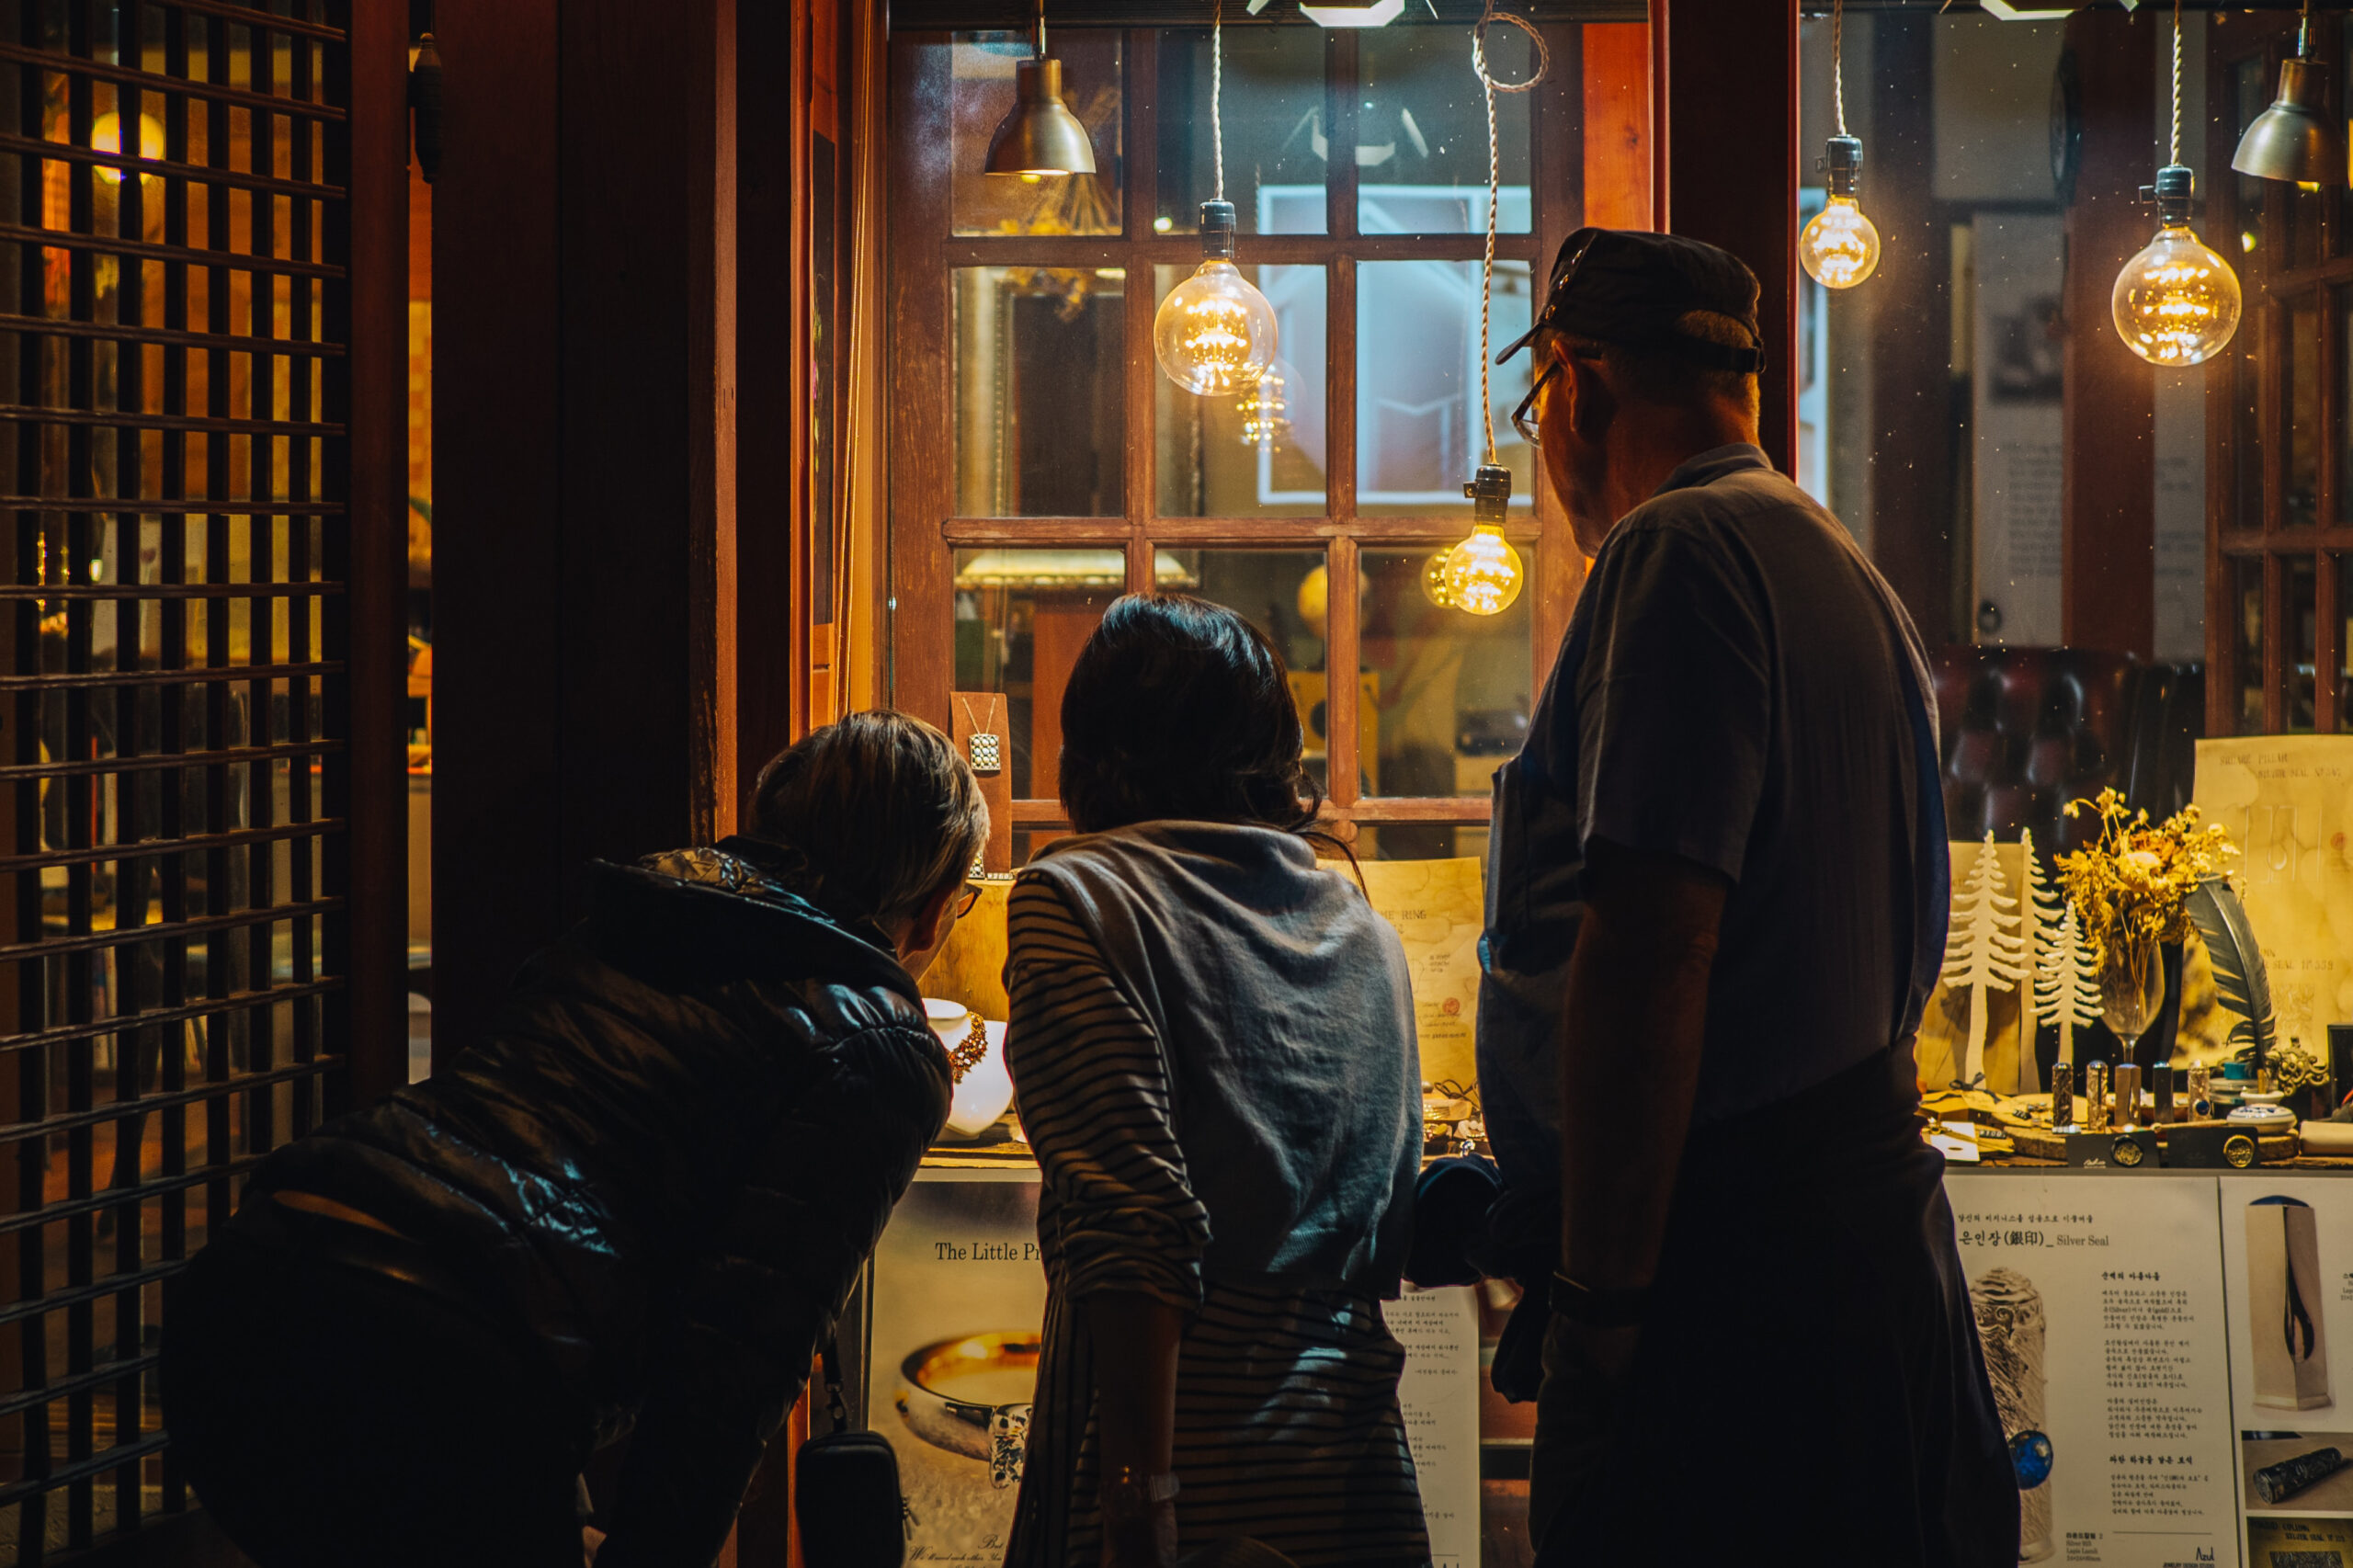 Curious onlookers exploring a traditional Korean handicraft shop at night, illuminated by warm, inviting lights.